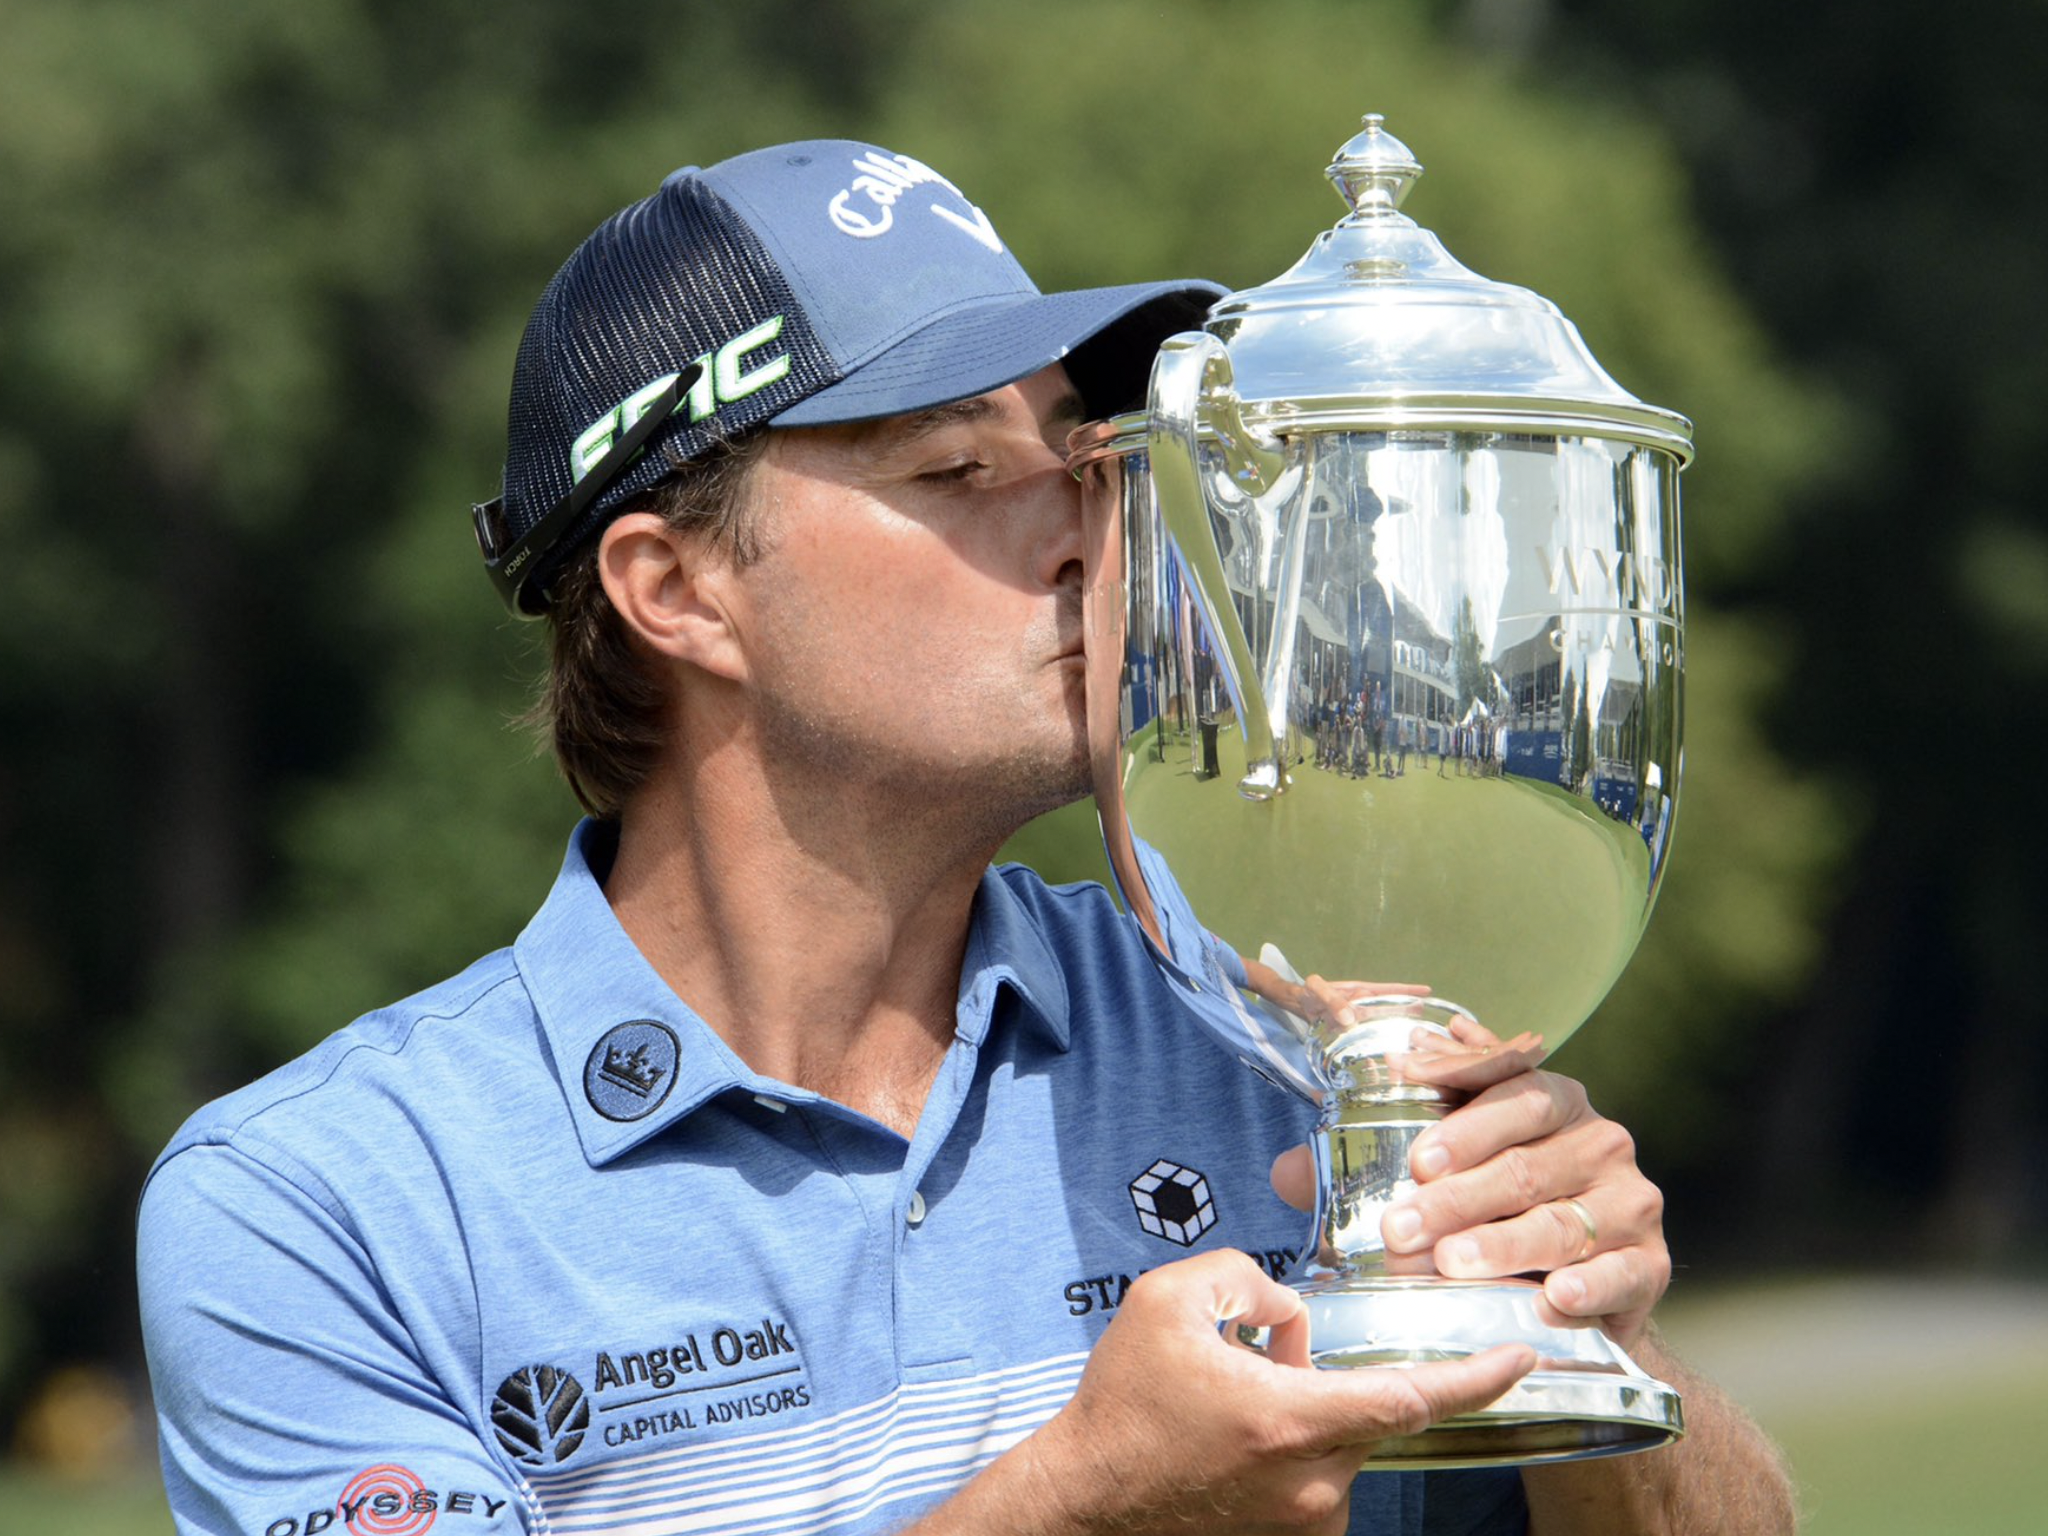 How much each player won at the 2021 Wyndham Championship